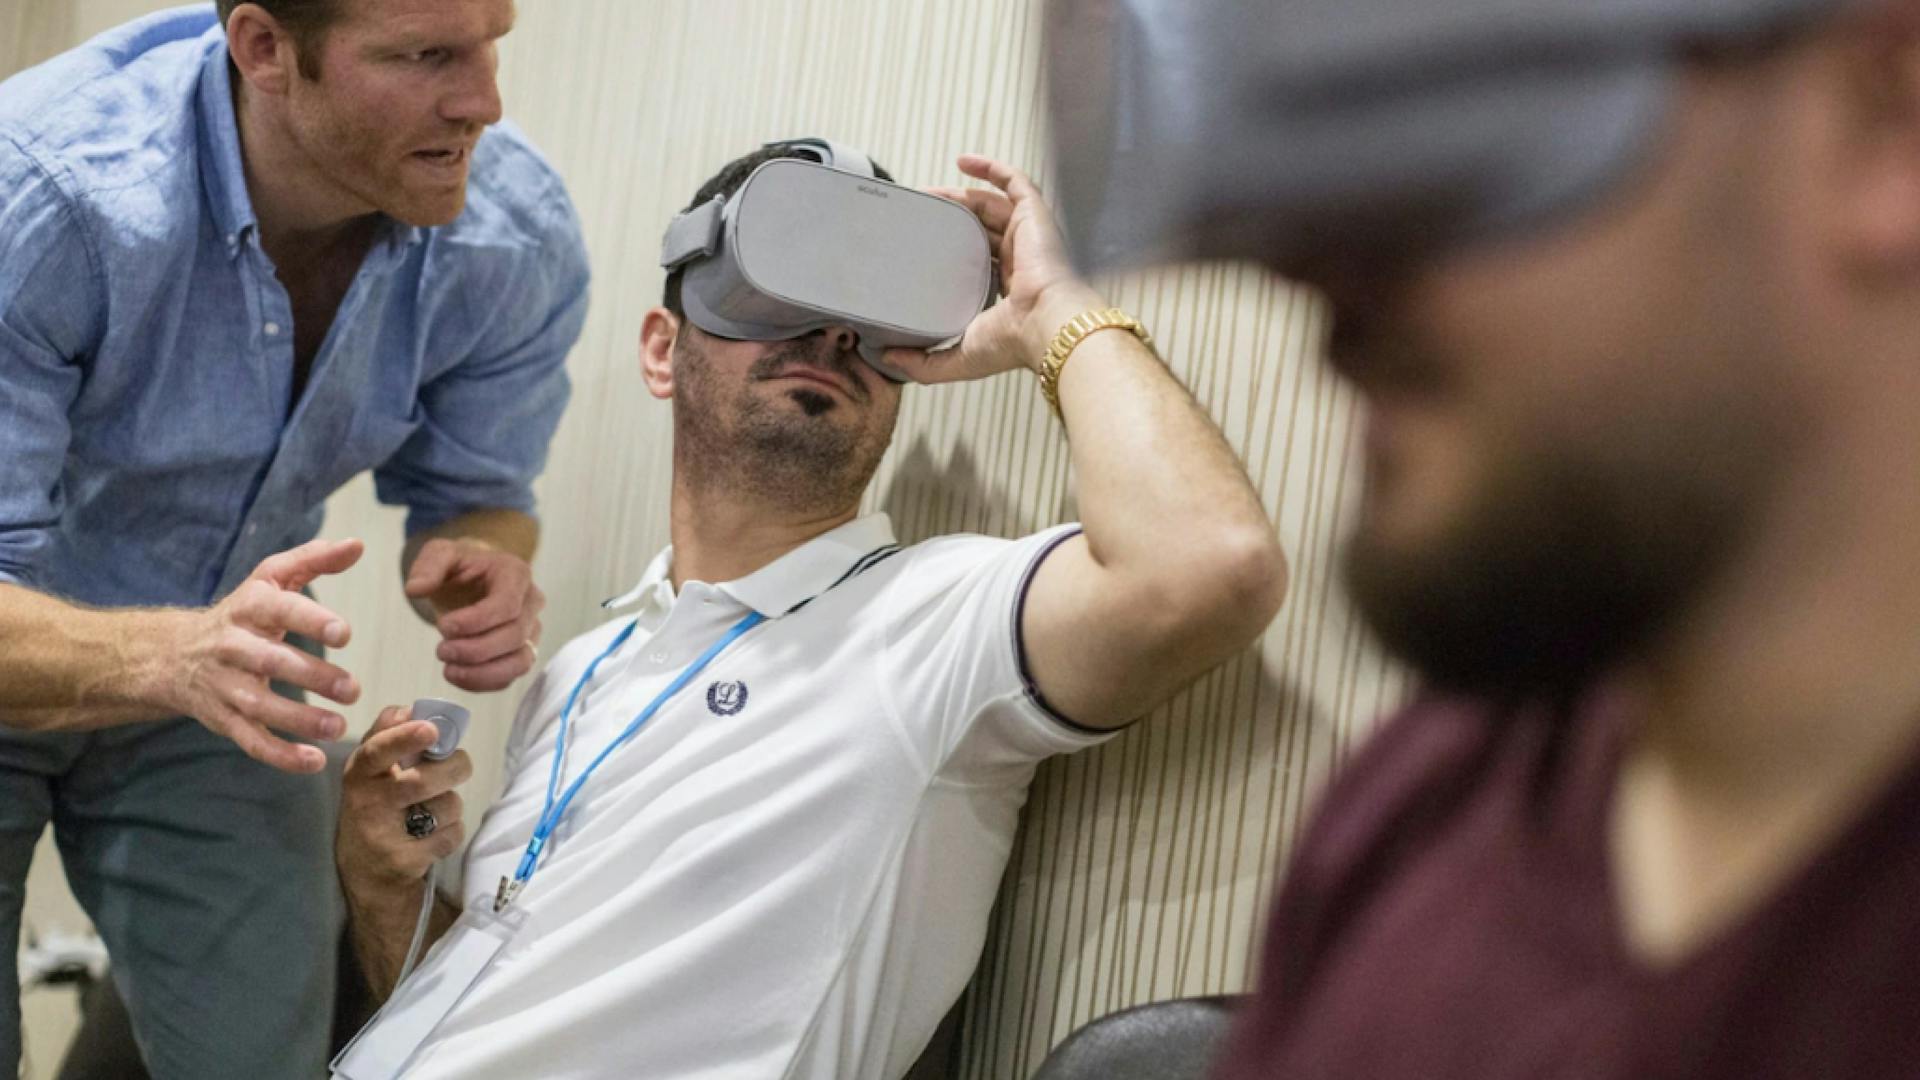 A man is sitting down, testing out the VR headset, there's a man beside him providing instructions and another man seated in the foreground, also wearing a headset.